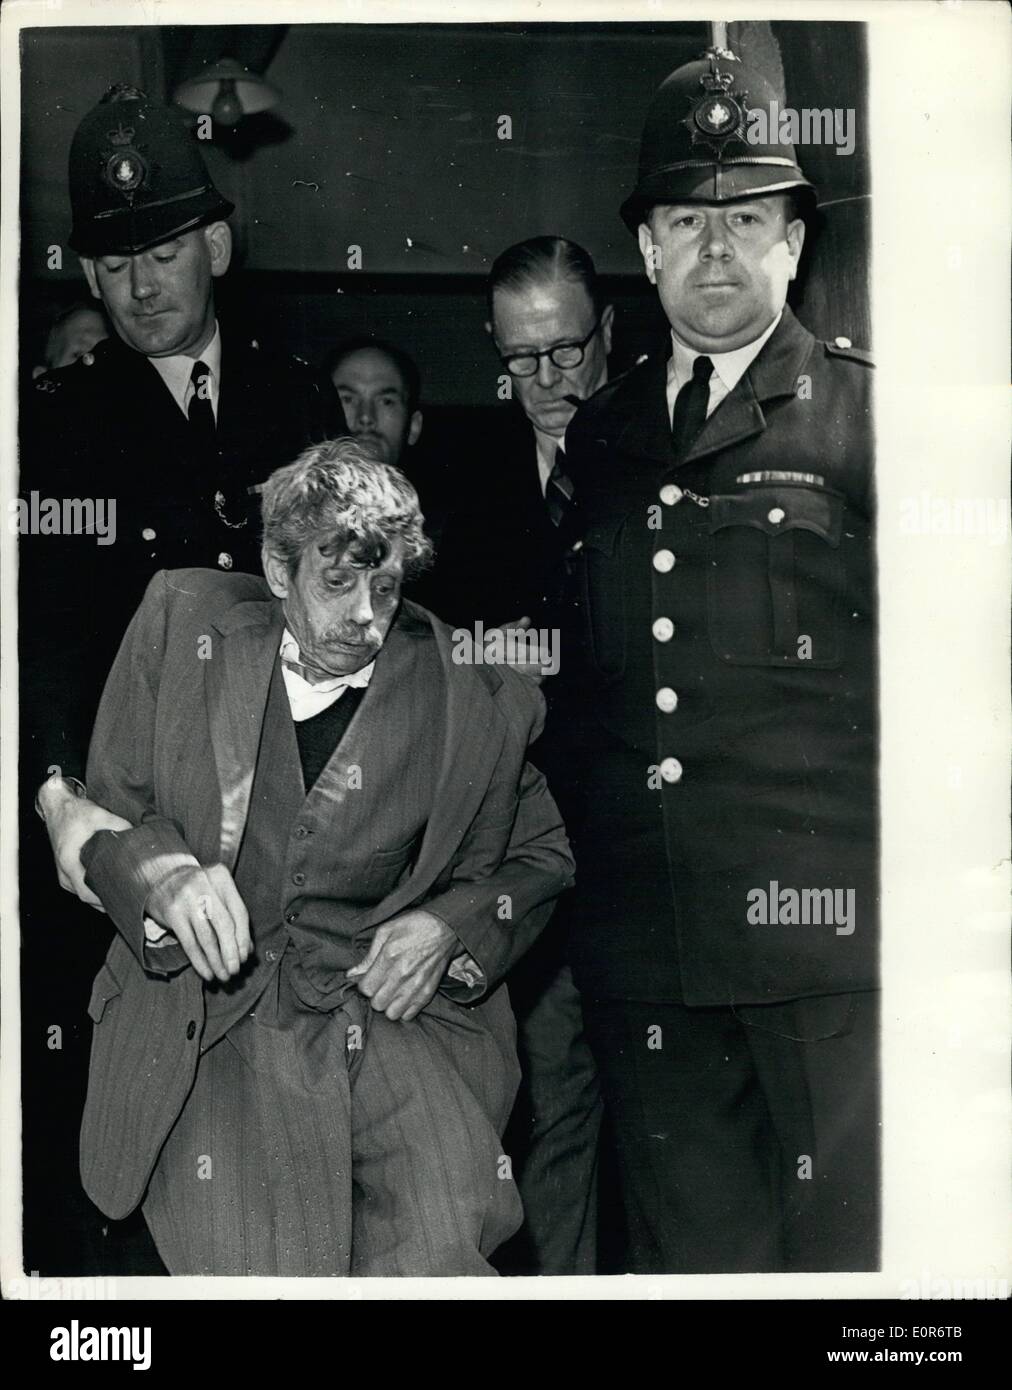 Jun. 06, 1958 - Seventy-One Year Old Hutch-Back Accused of the Murdered of Year Child - A army, of about 200 booed and shouted when TOM LIONEL BURIS, a 71 year old hunch-back left the Barrow,- in-fureass Magistrate's Court on Saturday after he had been charged with the murder of five year old LAVILIA MURRAY . Burns was driven to Walton Jail, Liverpool on remind until June 23rd.. lavinia and five year old SHEIIA BARICS wore found dead in a bedroom at Burn's, house at York Street, Barrow - the court was told KEYSTONE PHOTO SNOWS:- Tom Lionel Burns - Essorted by Police Stock Photo